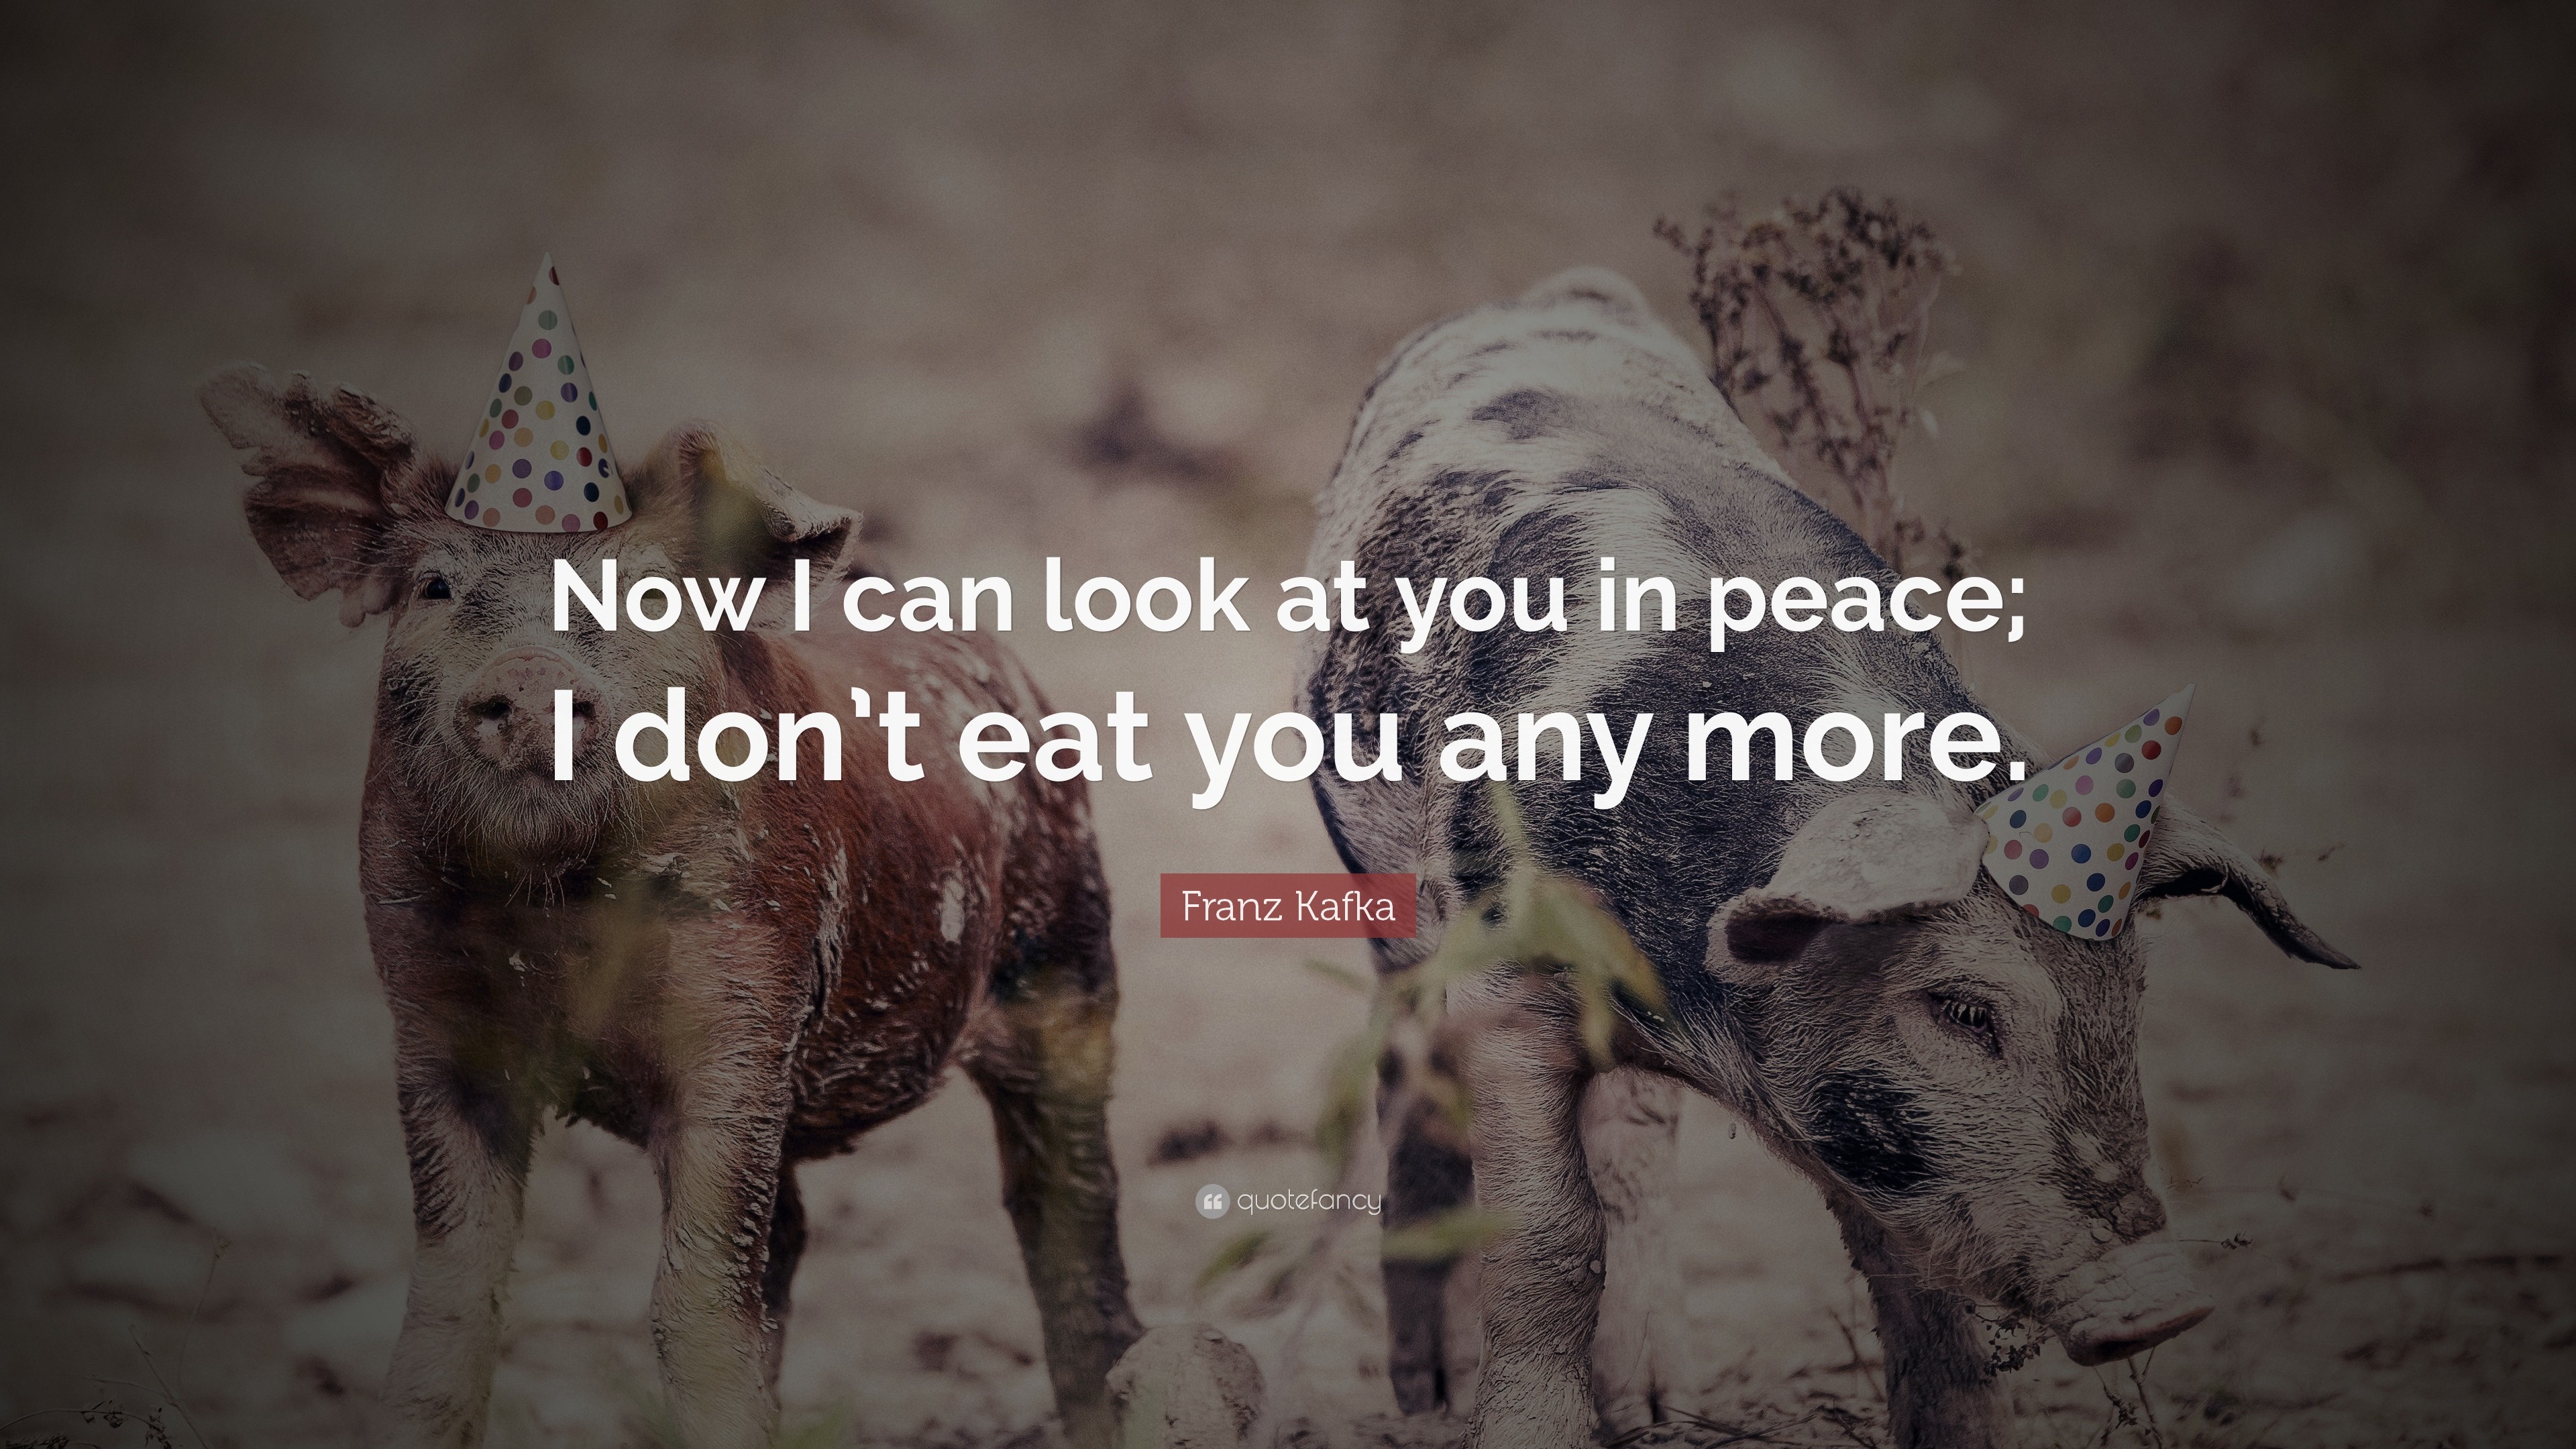 3840x2160 Quotes About Veganism: “Now I can look at you in peace; I don